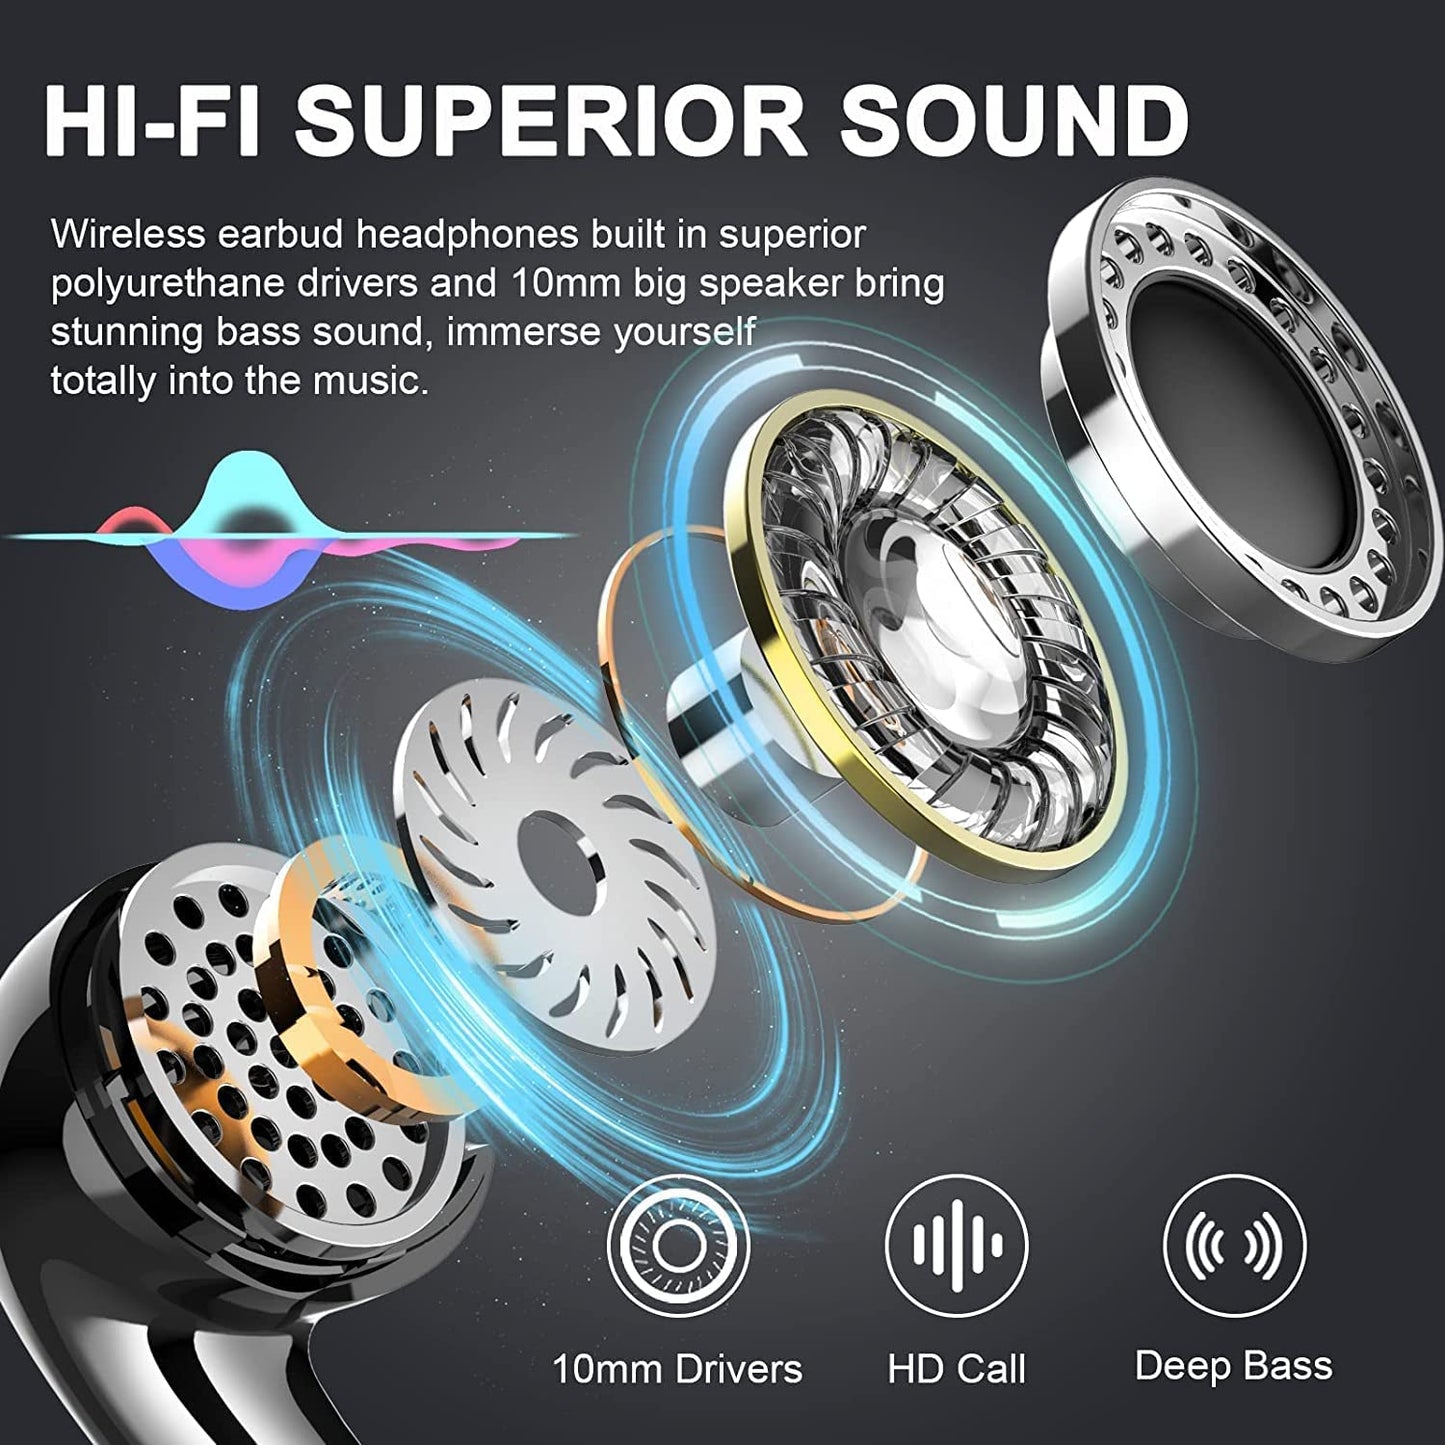 Bluetooth Headphones V5.3 Wireless Earbuds 48 Hrs Battery Life with Wireless Charging Case & LED Power Display Deep Bass IPX6 Waterproof Earphones Microphone Stereo Headset for iPhone & Android